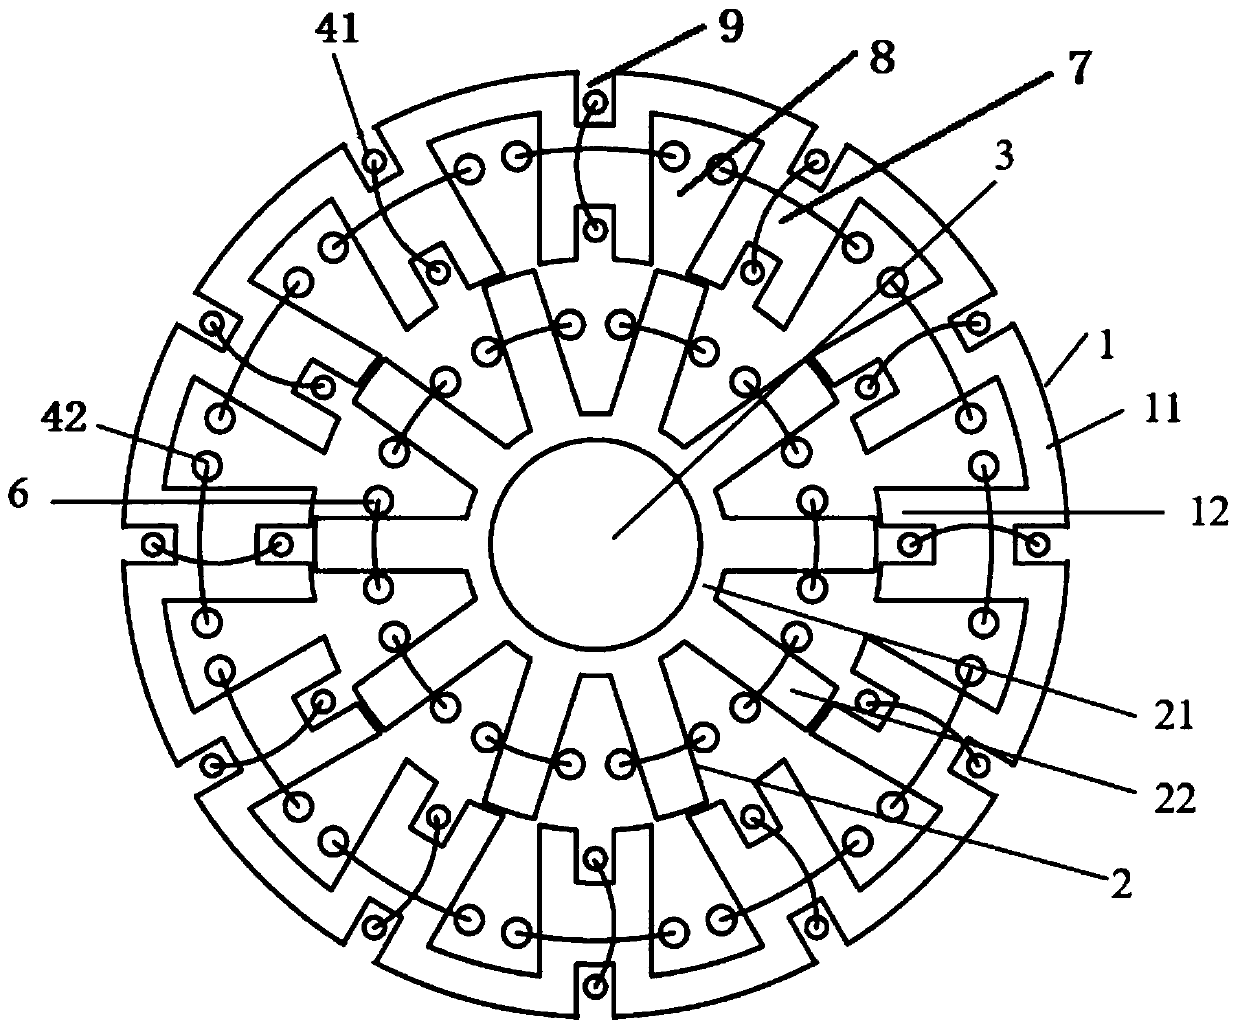 Double-fed type electrically excited synchronous motor